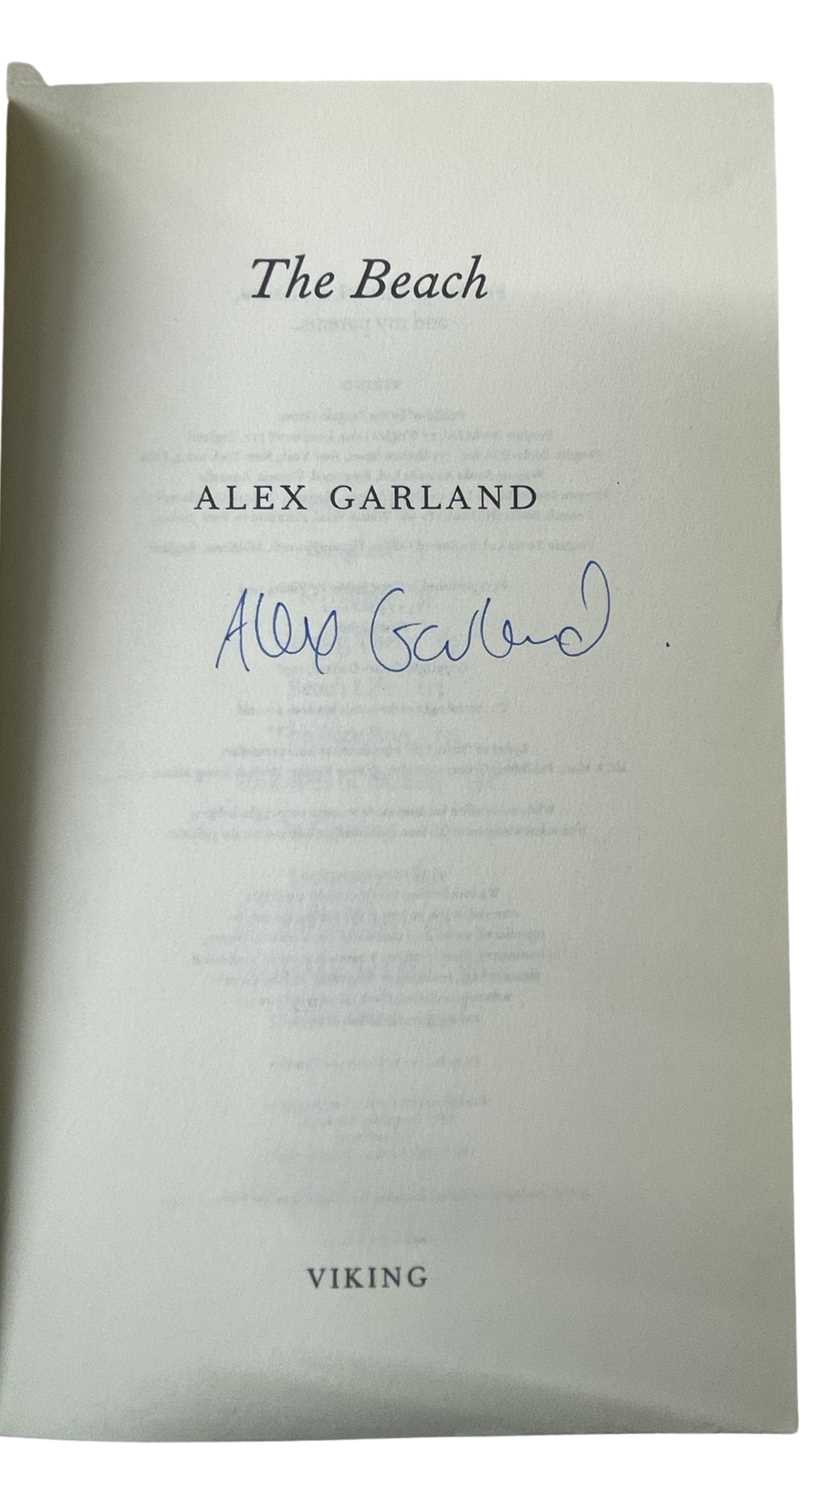 ALEX GARLAND: THE BEACH. London, Viking, 1996, First Edition. Inscribed by author to title page - Image 2 of 2